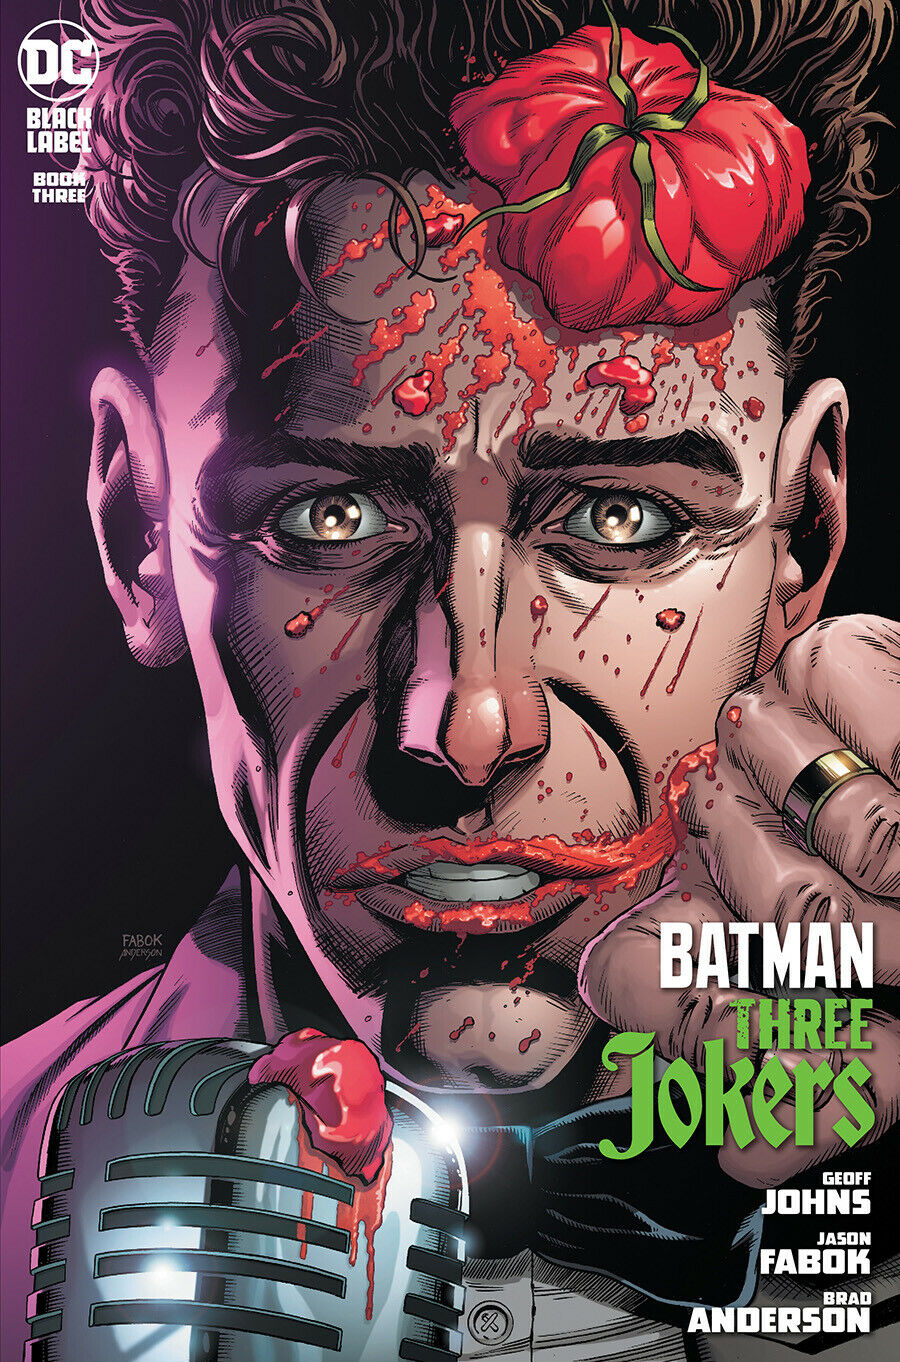 Batman Three Jokers #3 Stand-Up Comedian Premium Variant Cover 1st printing